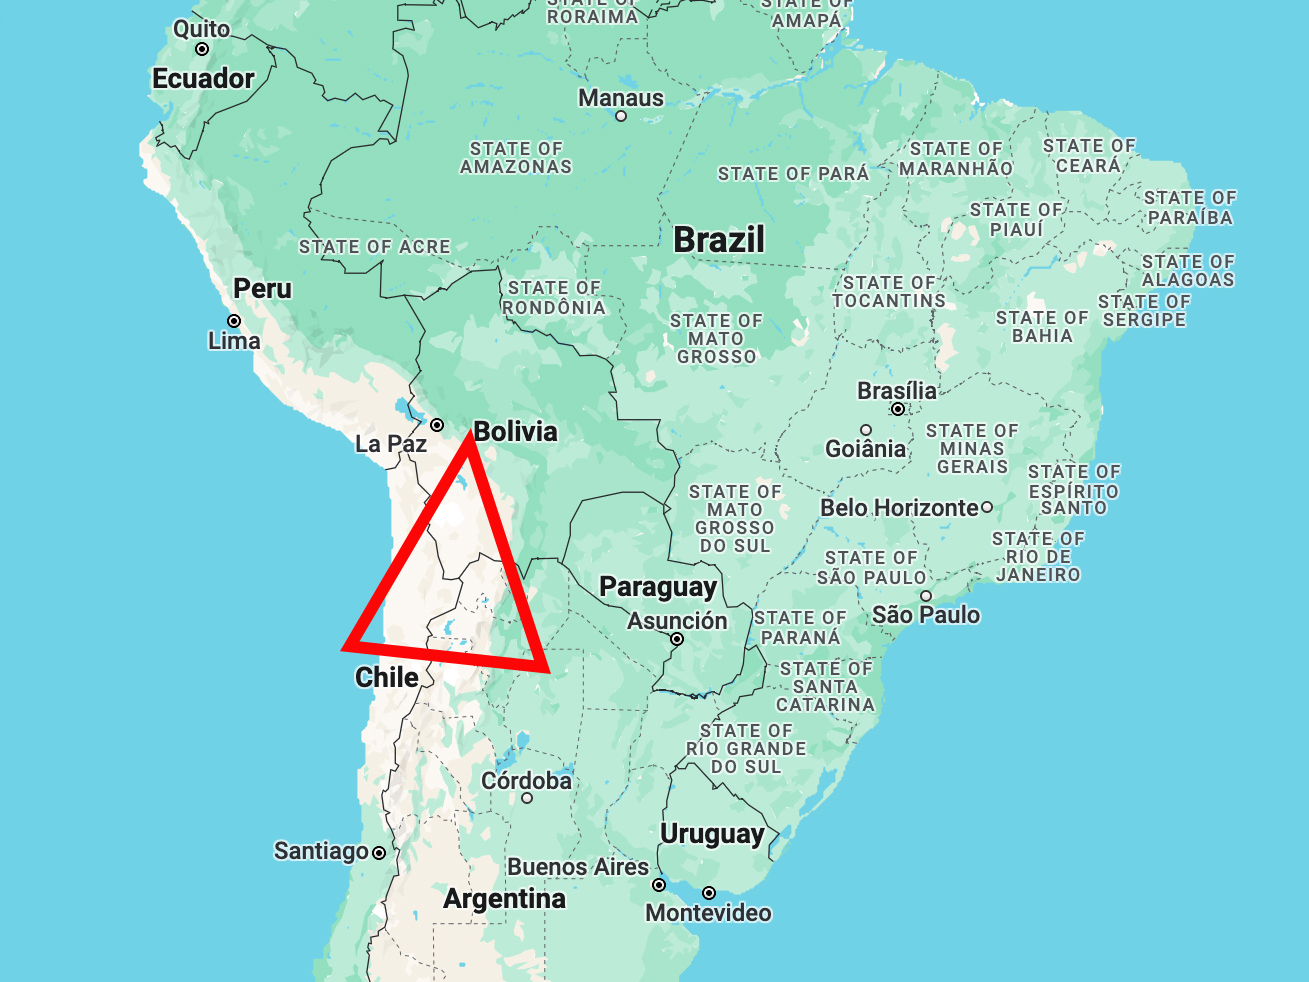 The Lithium Triangle in South America includes parts of Chile, Bolivia, and Argentina. (Image courtesy of Google Maps)